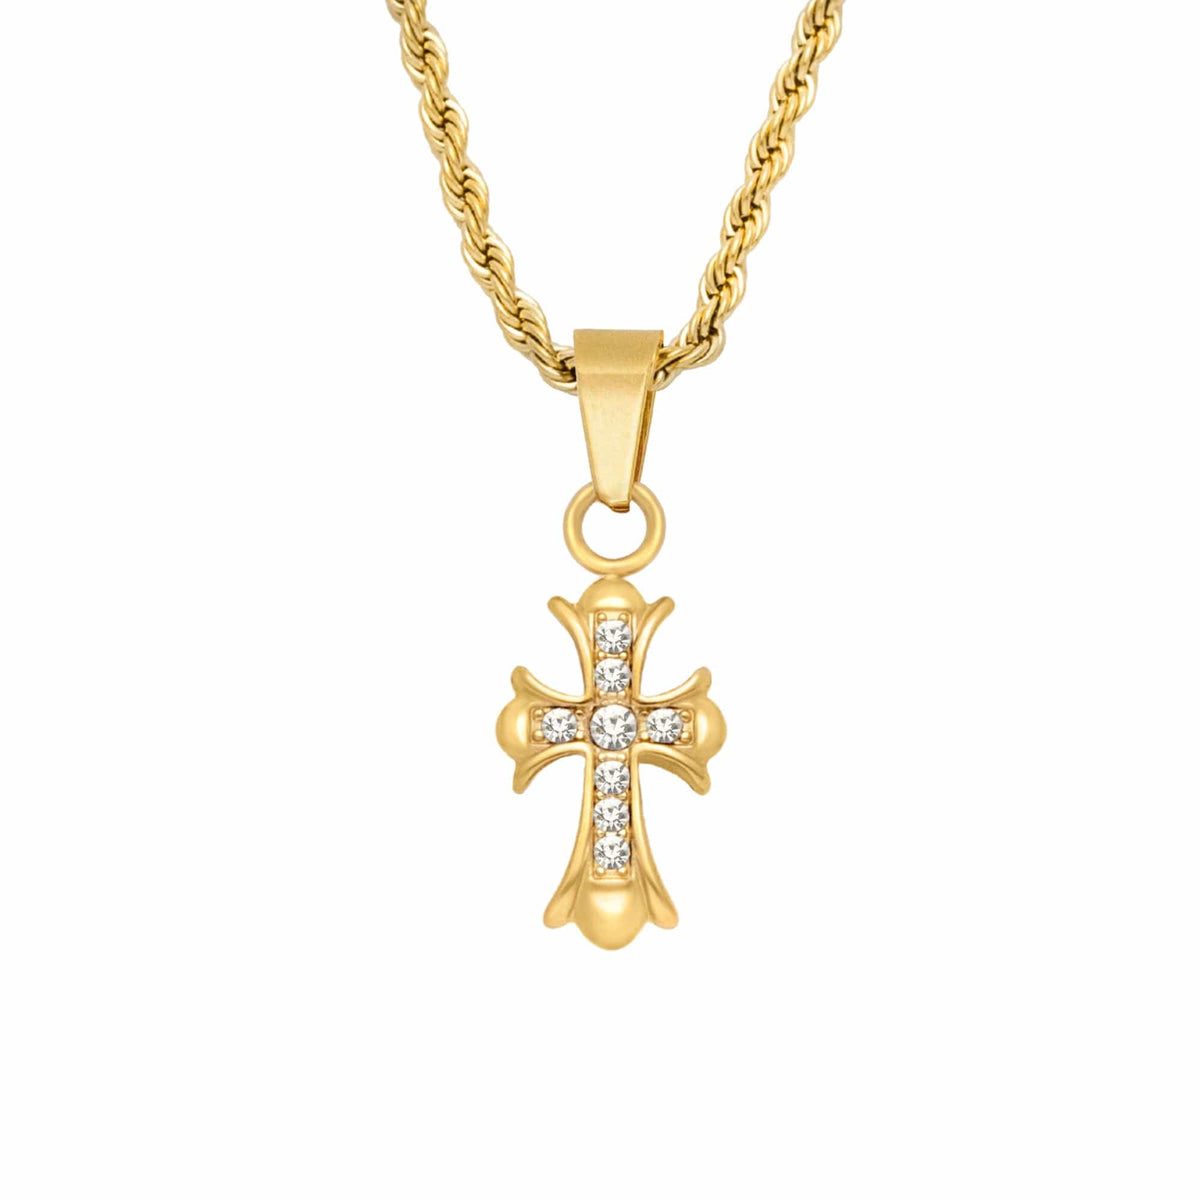 BohoMoon Stainless Steel Lillie Cross Necklace Gold